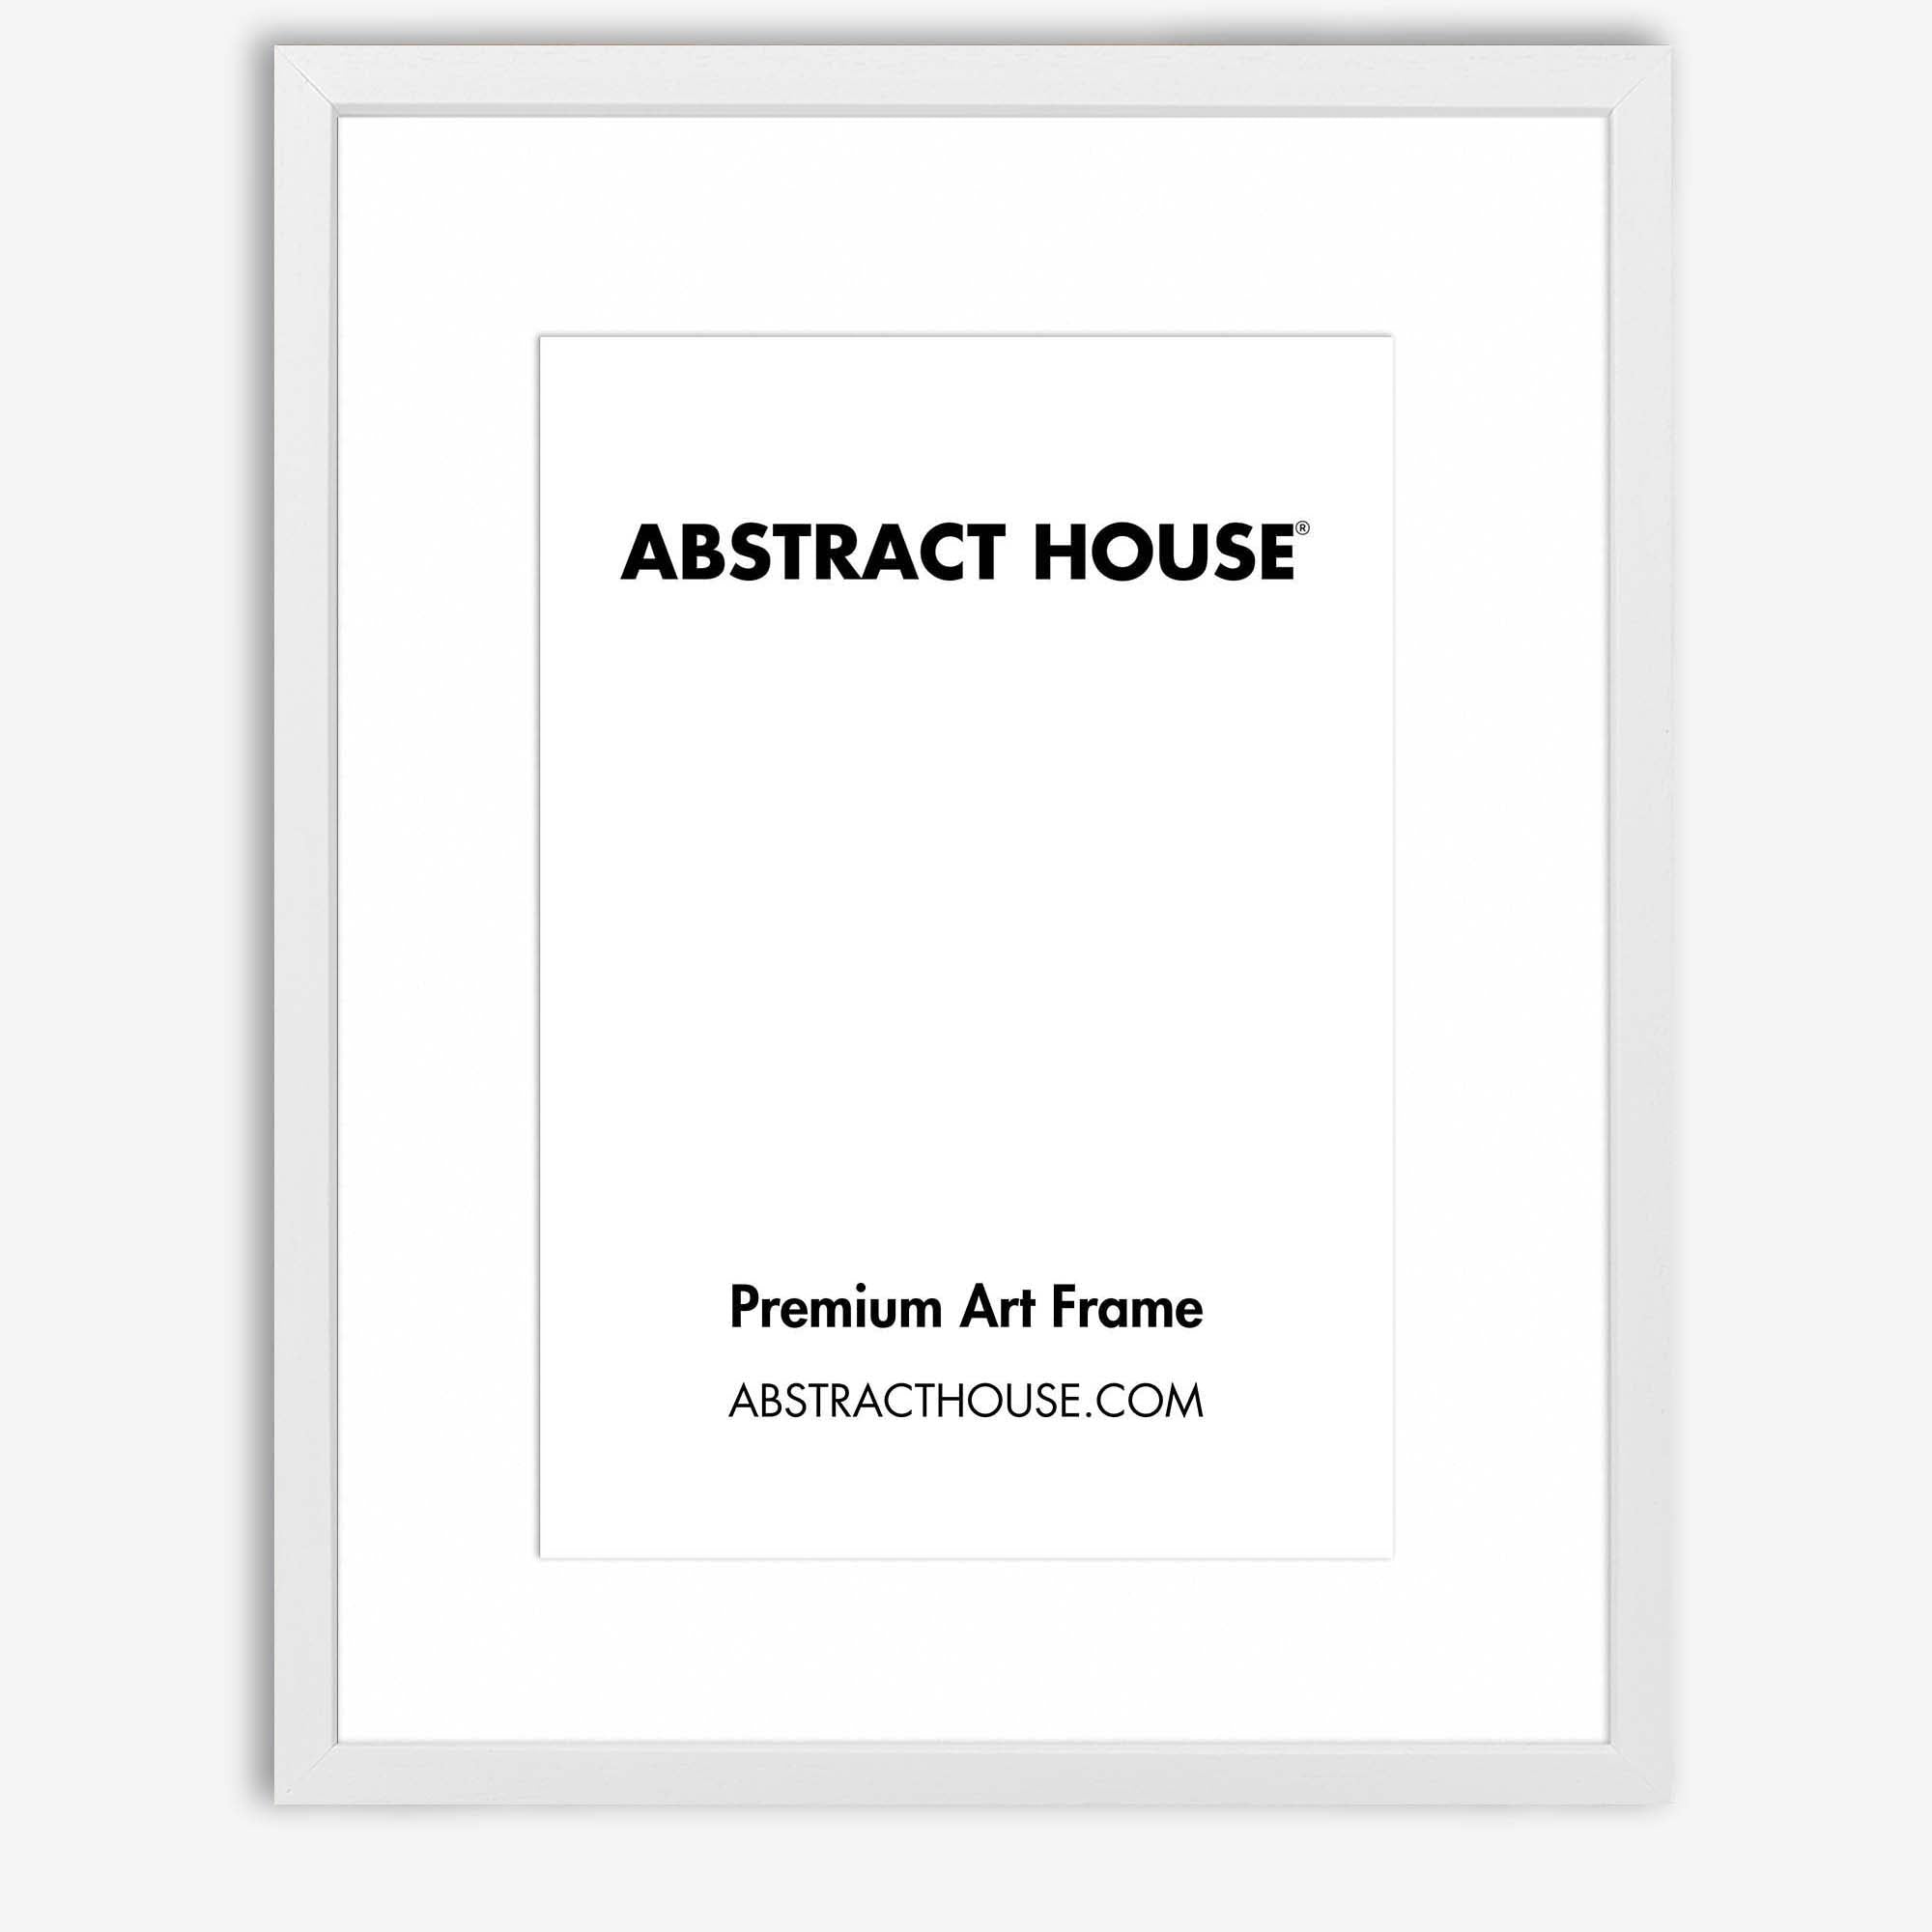 50x60cm Wooden Frame-White-A3 29.7 x 42cm / 11.7 x 16.5 Inches-Abstract House